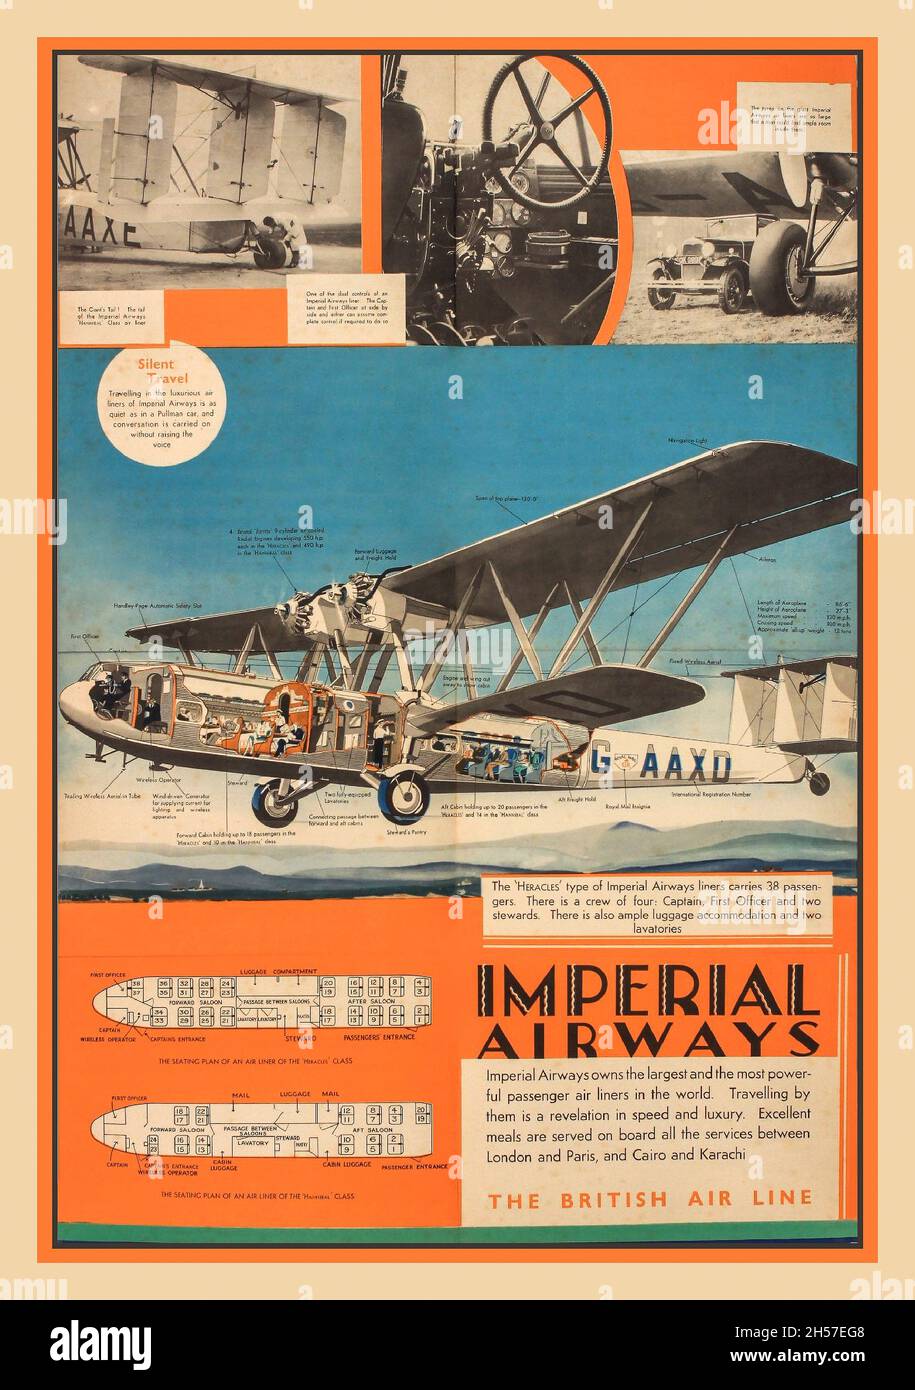 IMPERIAL AIRWAYS Vintage 1900s advertising poster for Imperial Airways, 'The British Air Line' services between London Paris Cairo and Karachi  Imperial Airways was the early British commercial long-range airline, operating from 1924 to 1939 and principally serving the British Empire routes to South Africa, India and the Far East, including Australia, Malaya and Hong Kong. Stock Photo